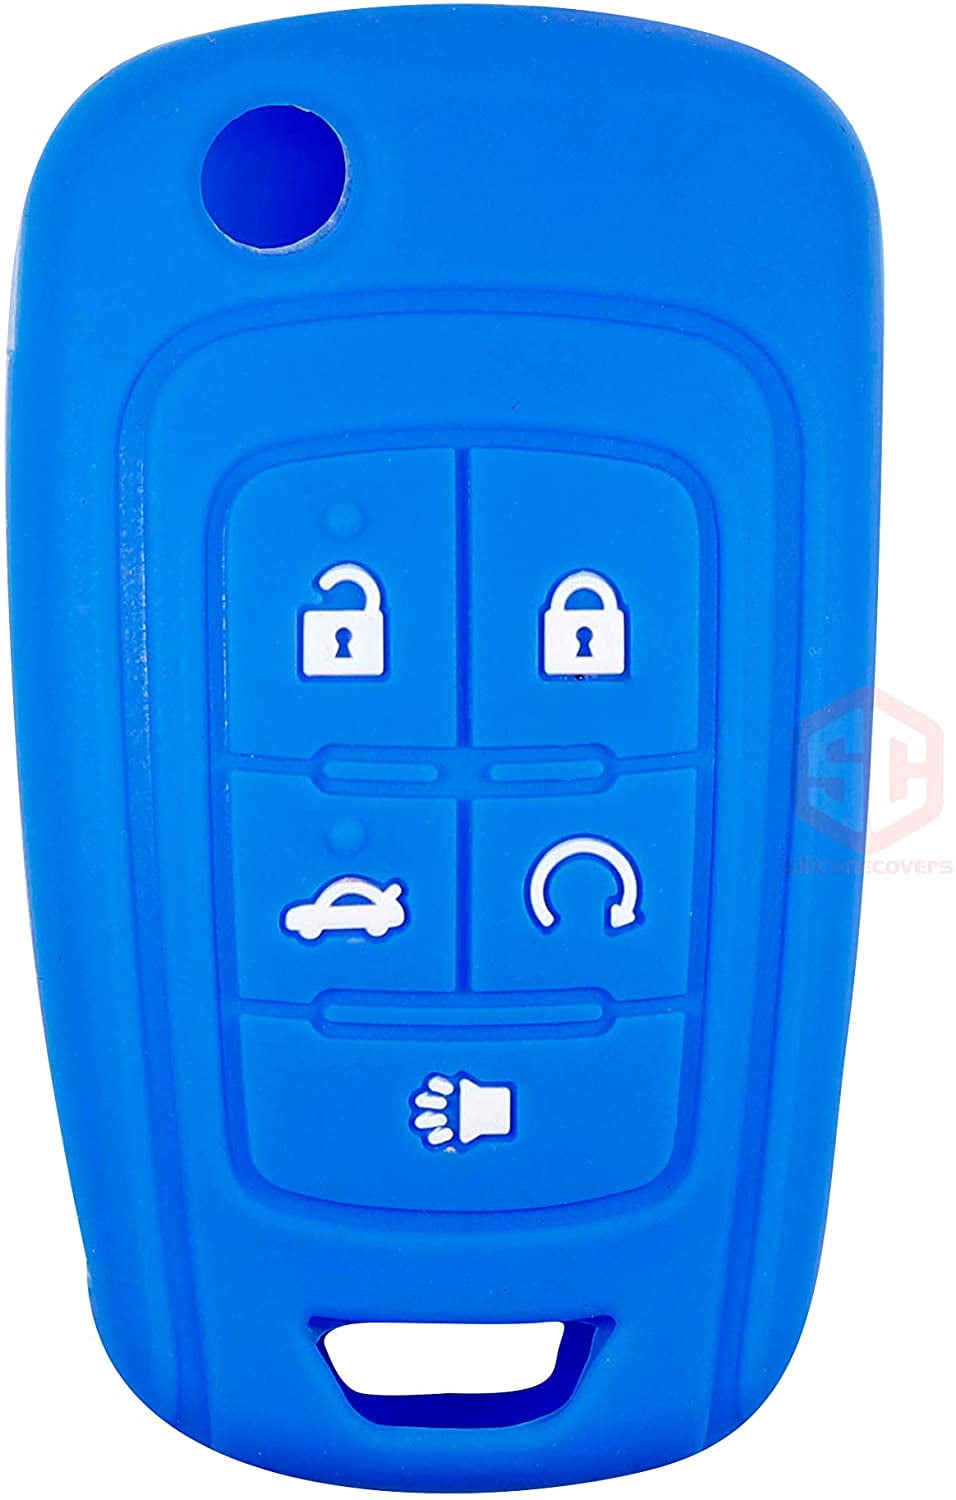 1x New Key Fob Remote Silicone Cover Fit For Select GM Vehicles OHT01060512 etc.